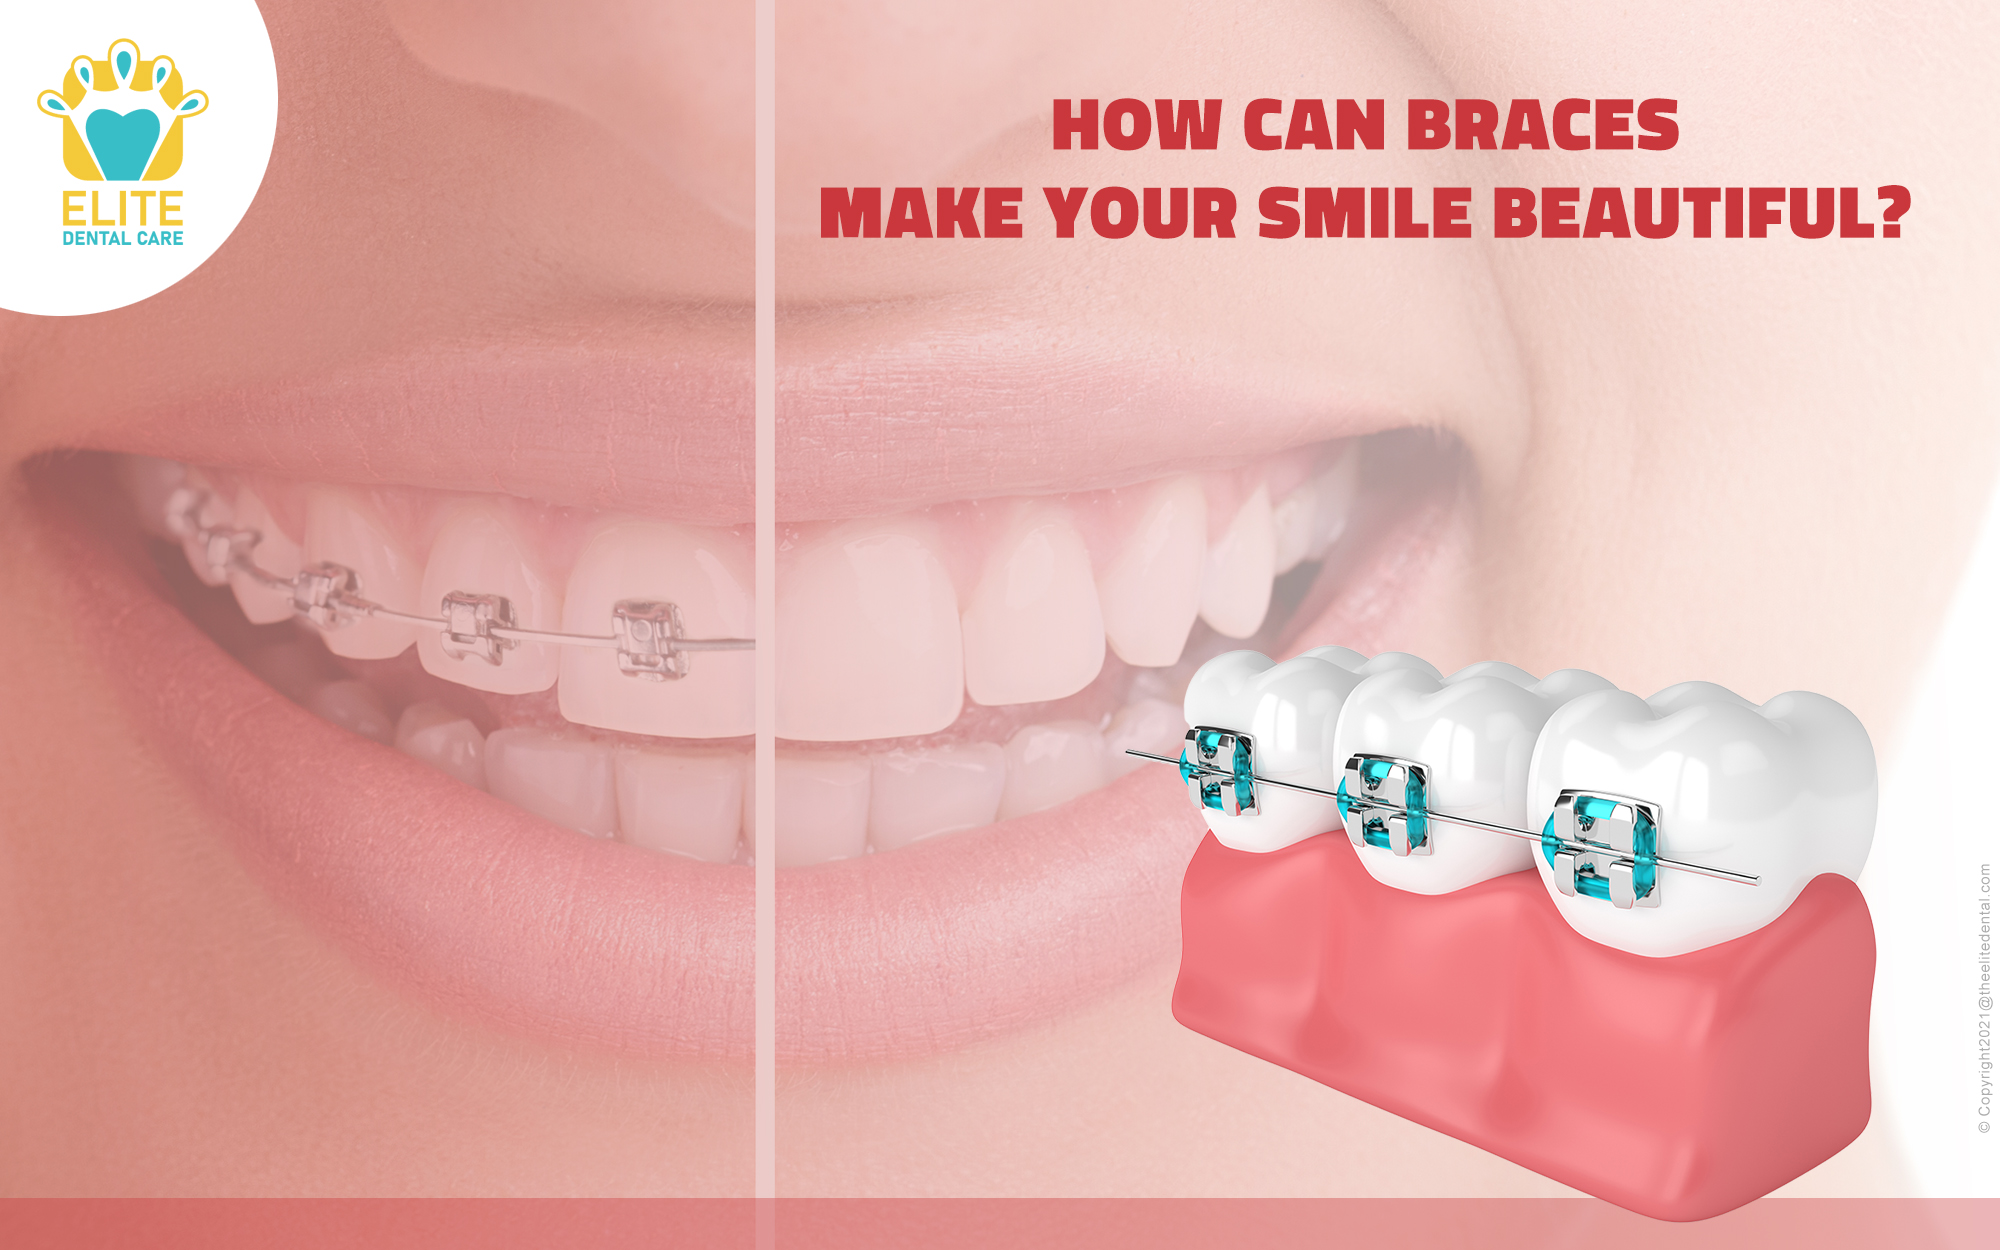 HOW CAN BRACES MAKE YOUR SMILE BEAUTIFUL?